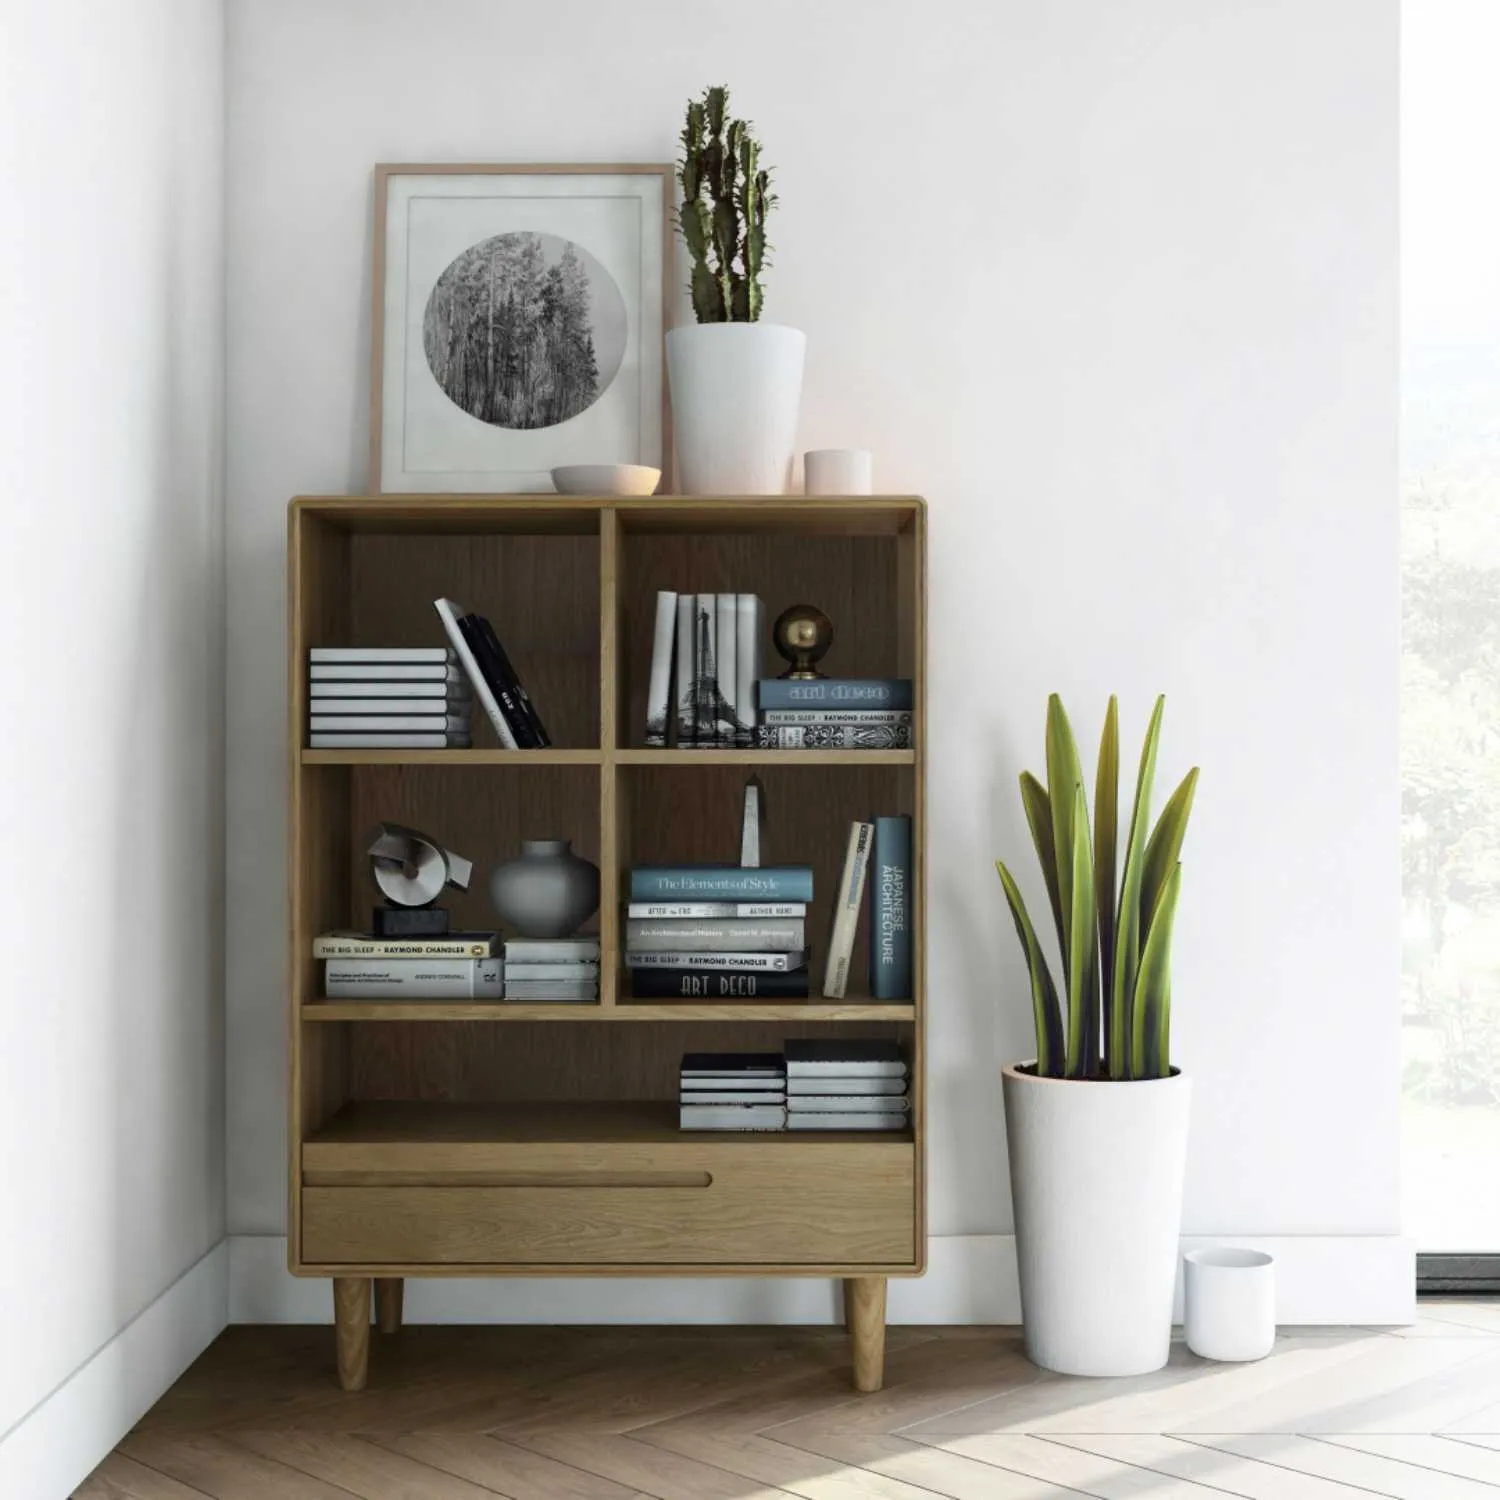 Nordic Scandic Oak Small Open Bookcase Display Shelving Unit With 1 Drawer on legs